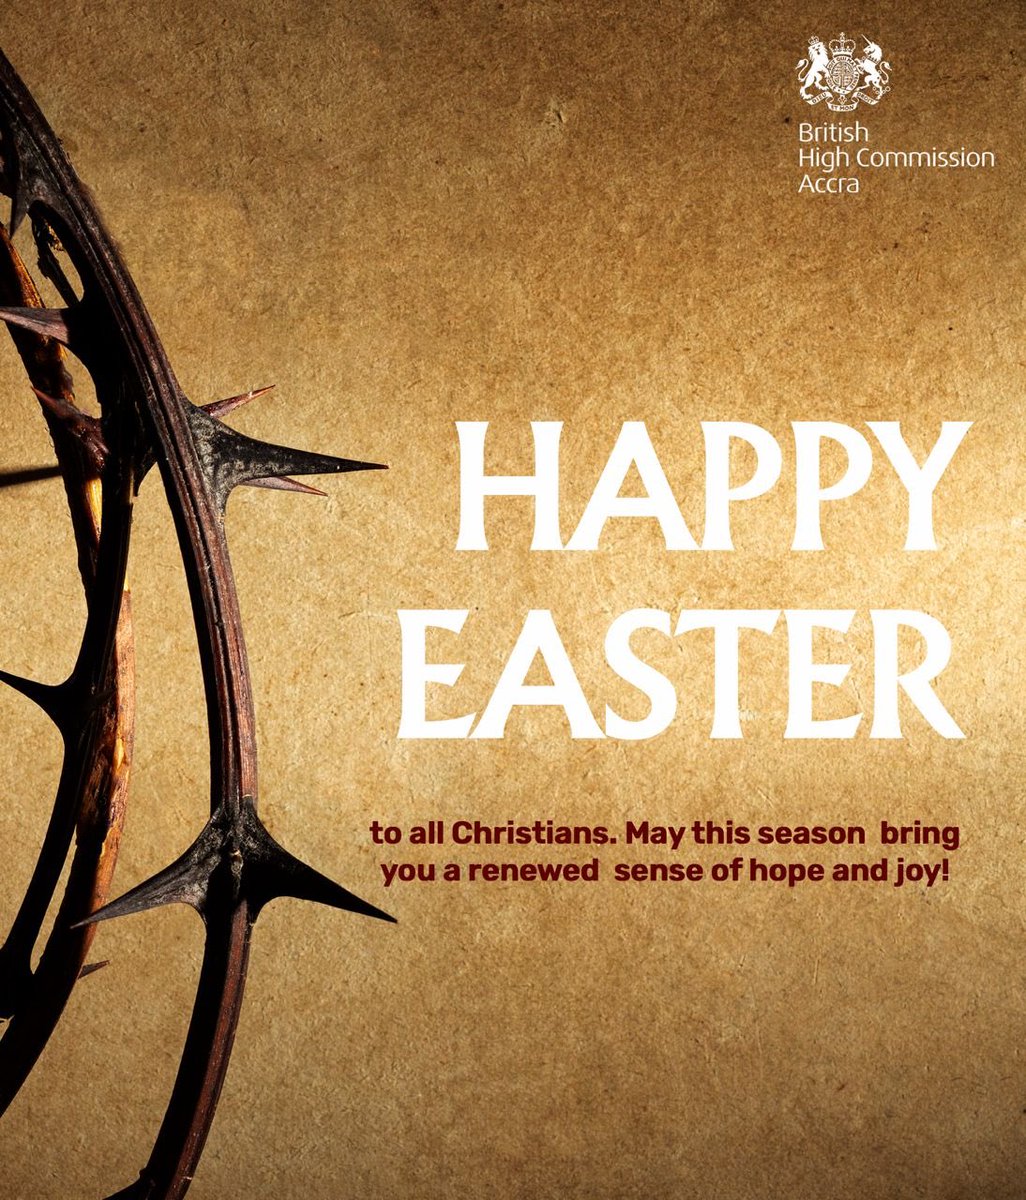 A happy, happy Easter to all; wishing everyone the hope and joy that Easter brings 🐣